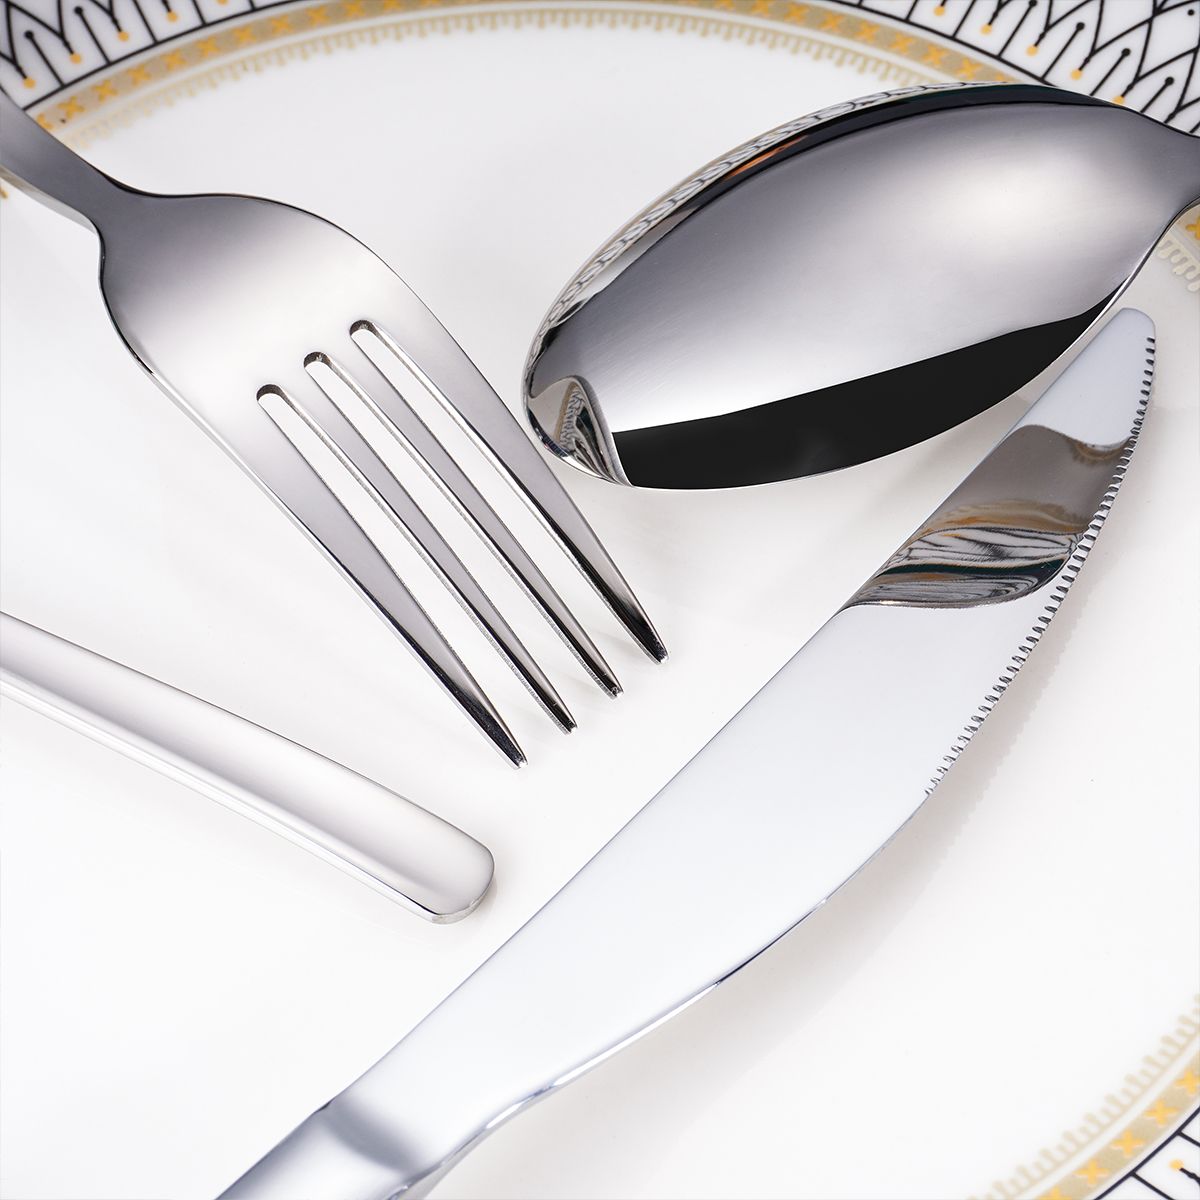 Wholesale Restaurant Cutlery William Rogers Sons Silverware China Wm Son Set Stainless Spoon And Fork Supplier Philippines